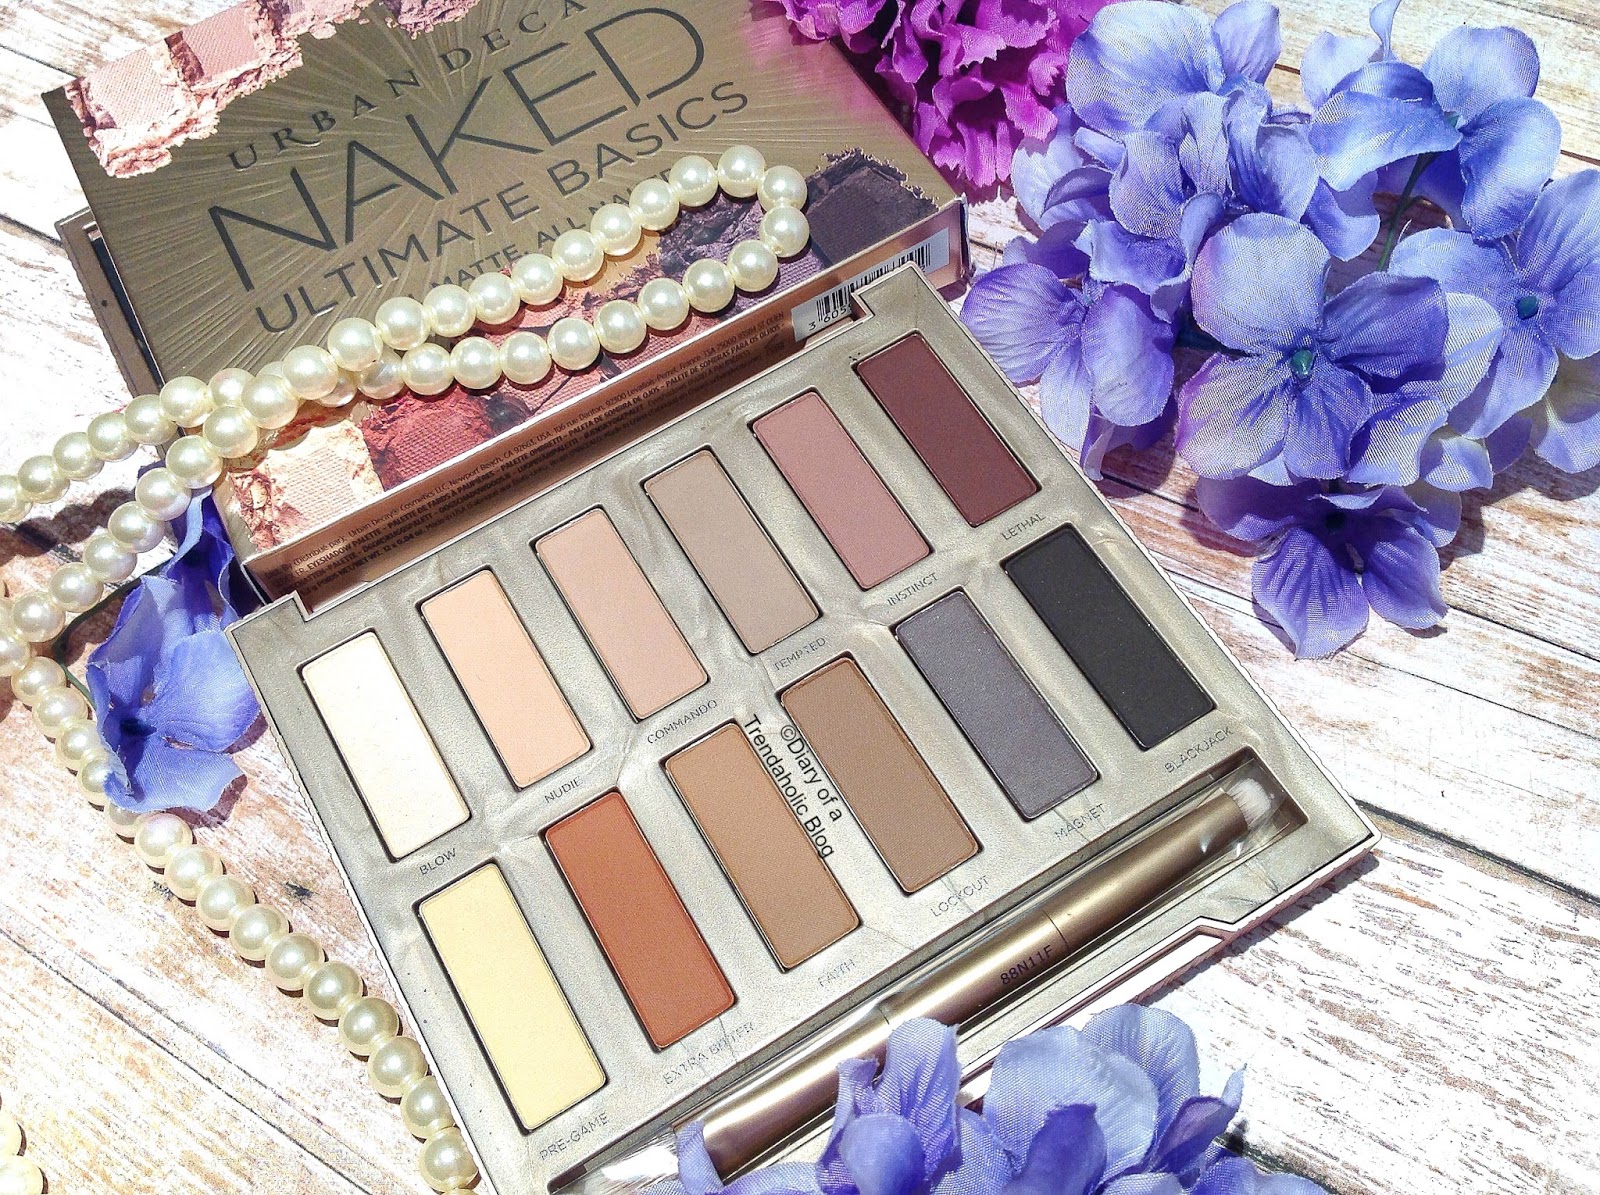 Urban Decay Naked Ultimate Basics Eye Shadow Palette Review.